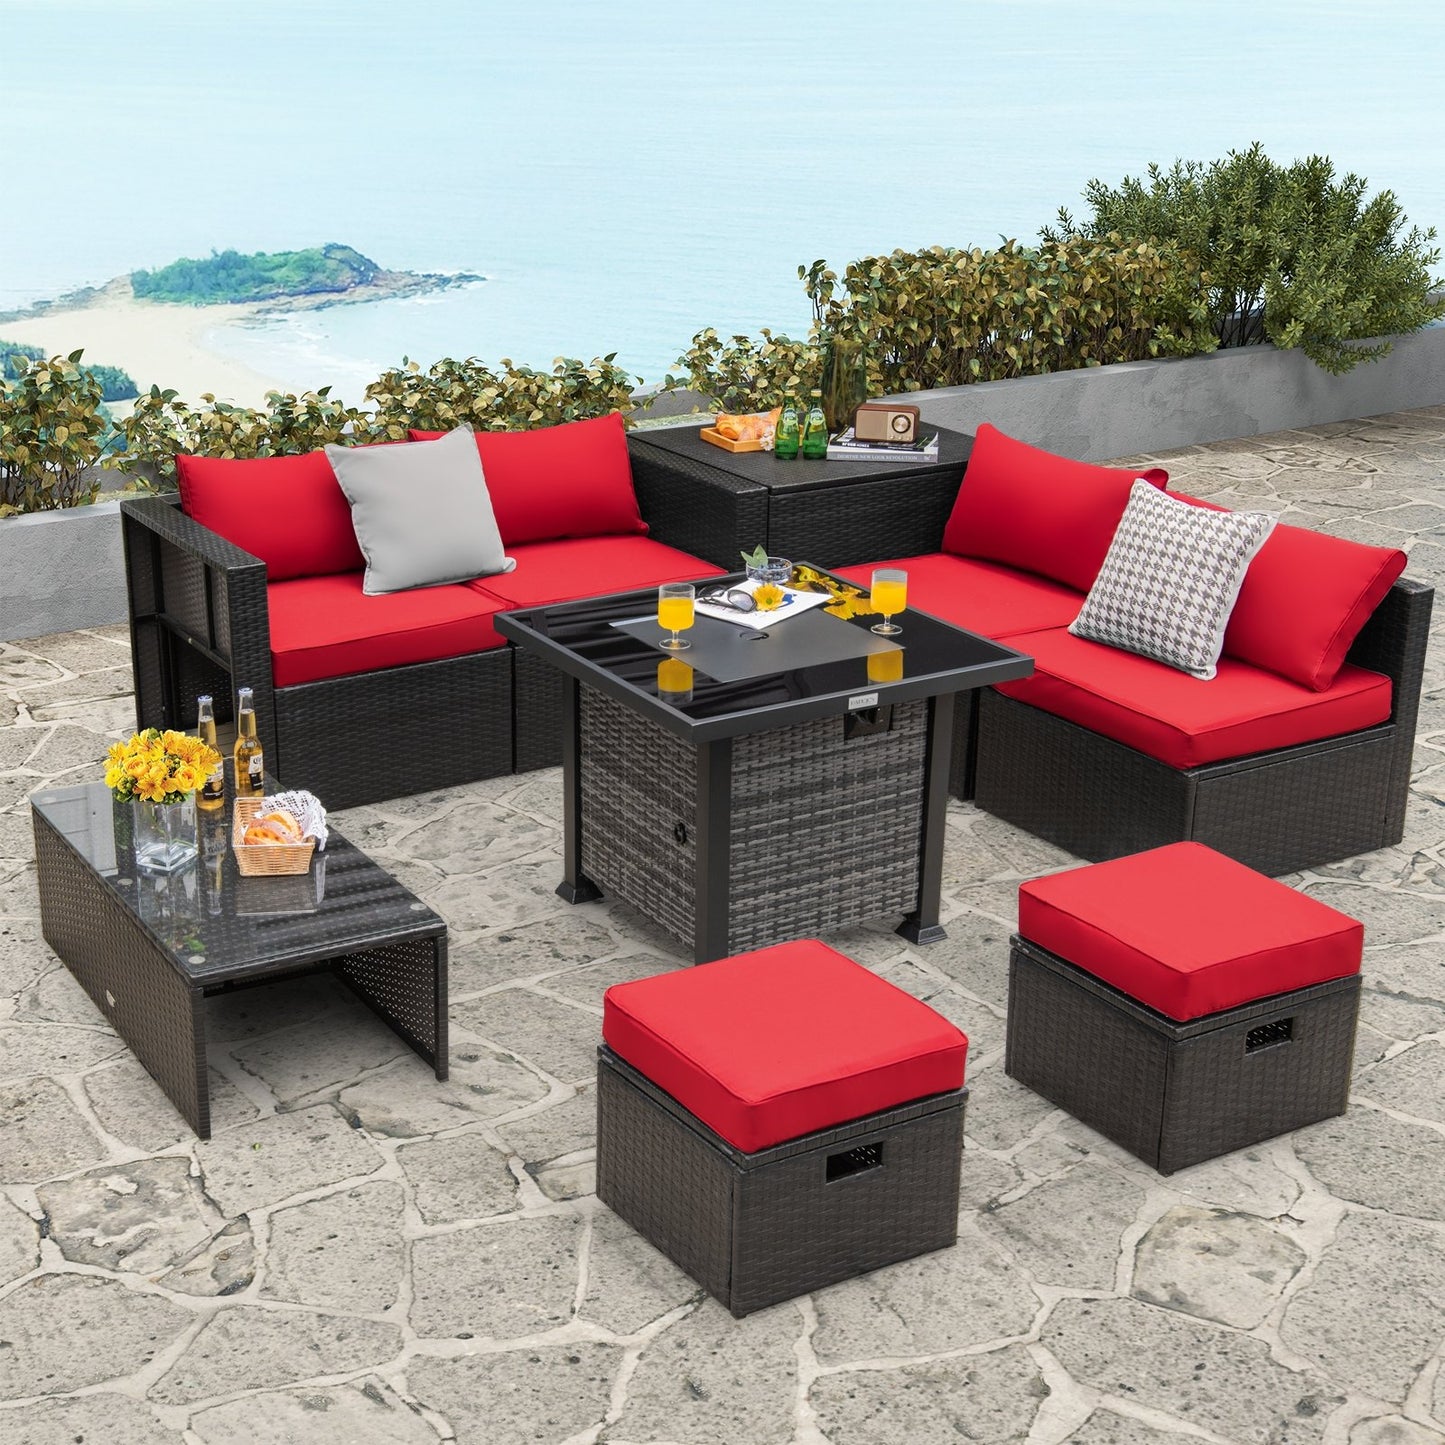 Outdoor 9 Pieces Patio Furniture Set with 50 000 BTU Propane Fire Pit Table, Red